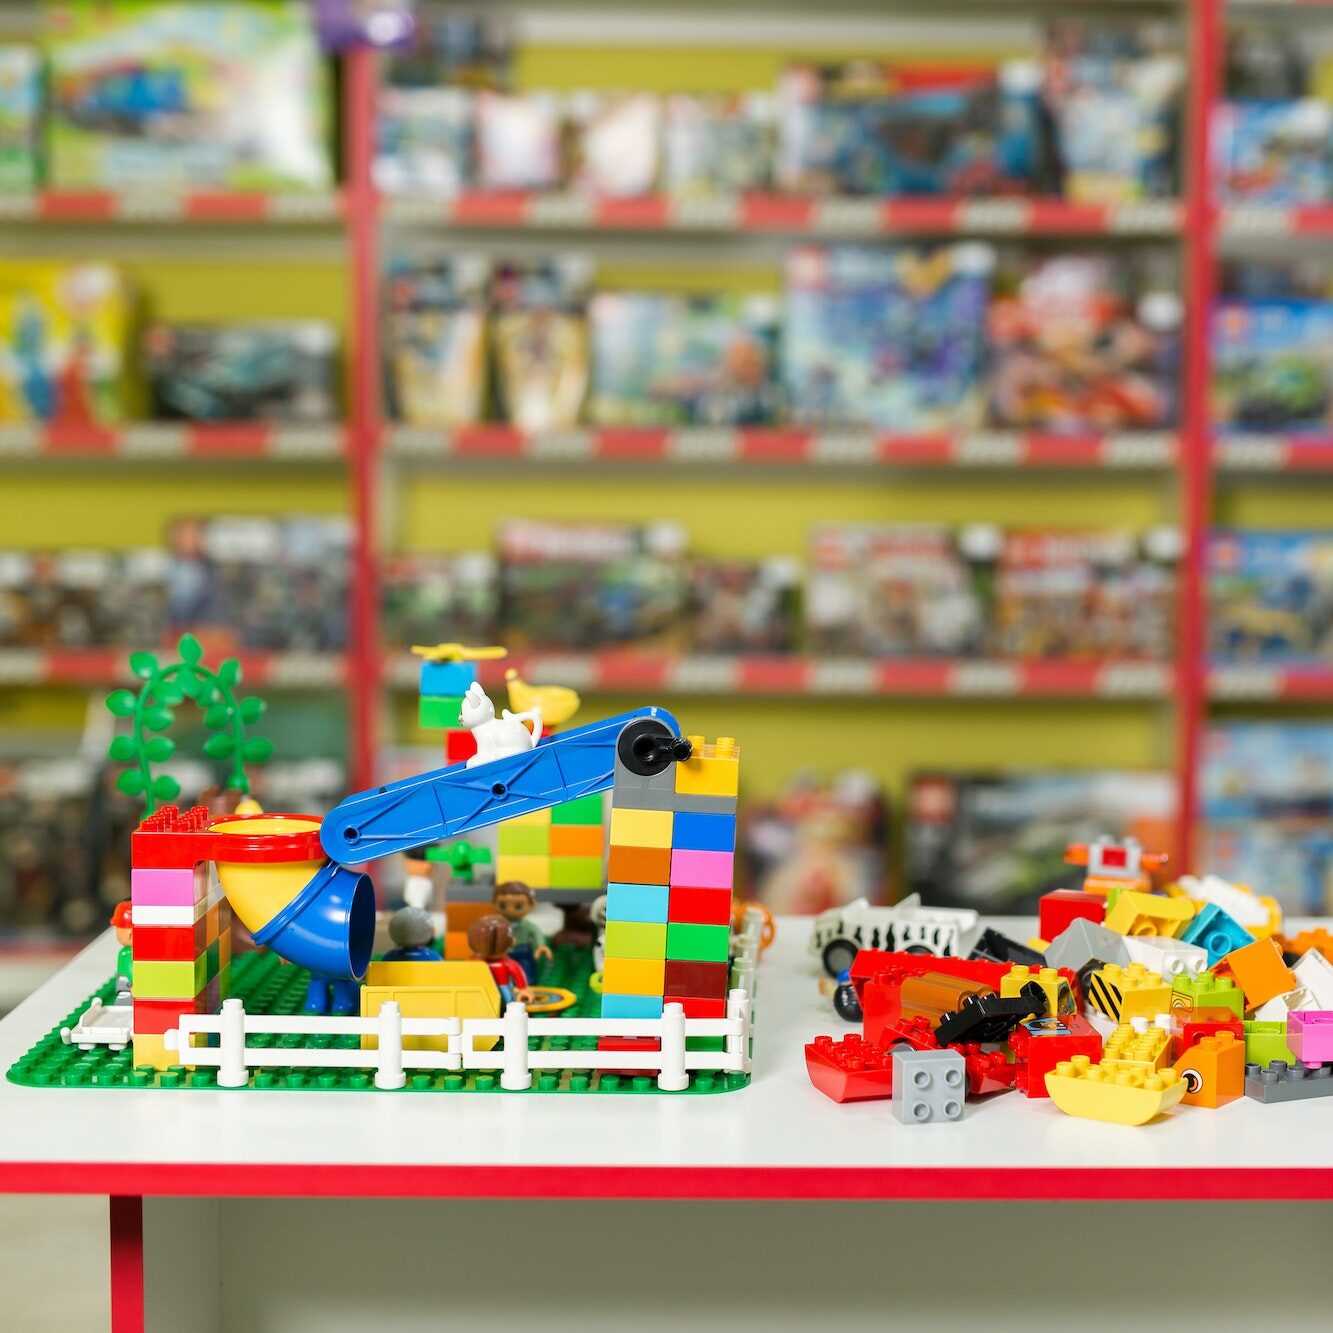 Plastic toy blocks on the white table in the store